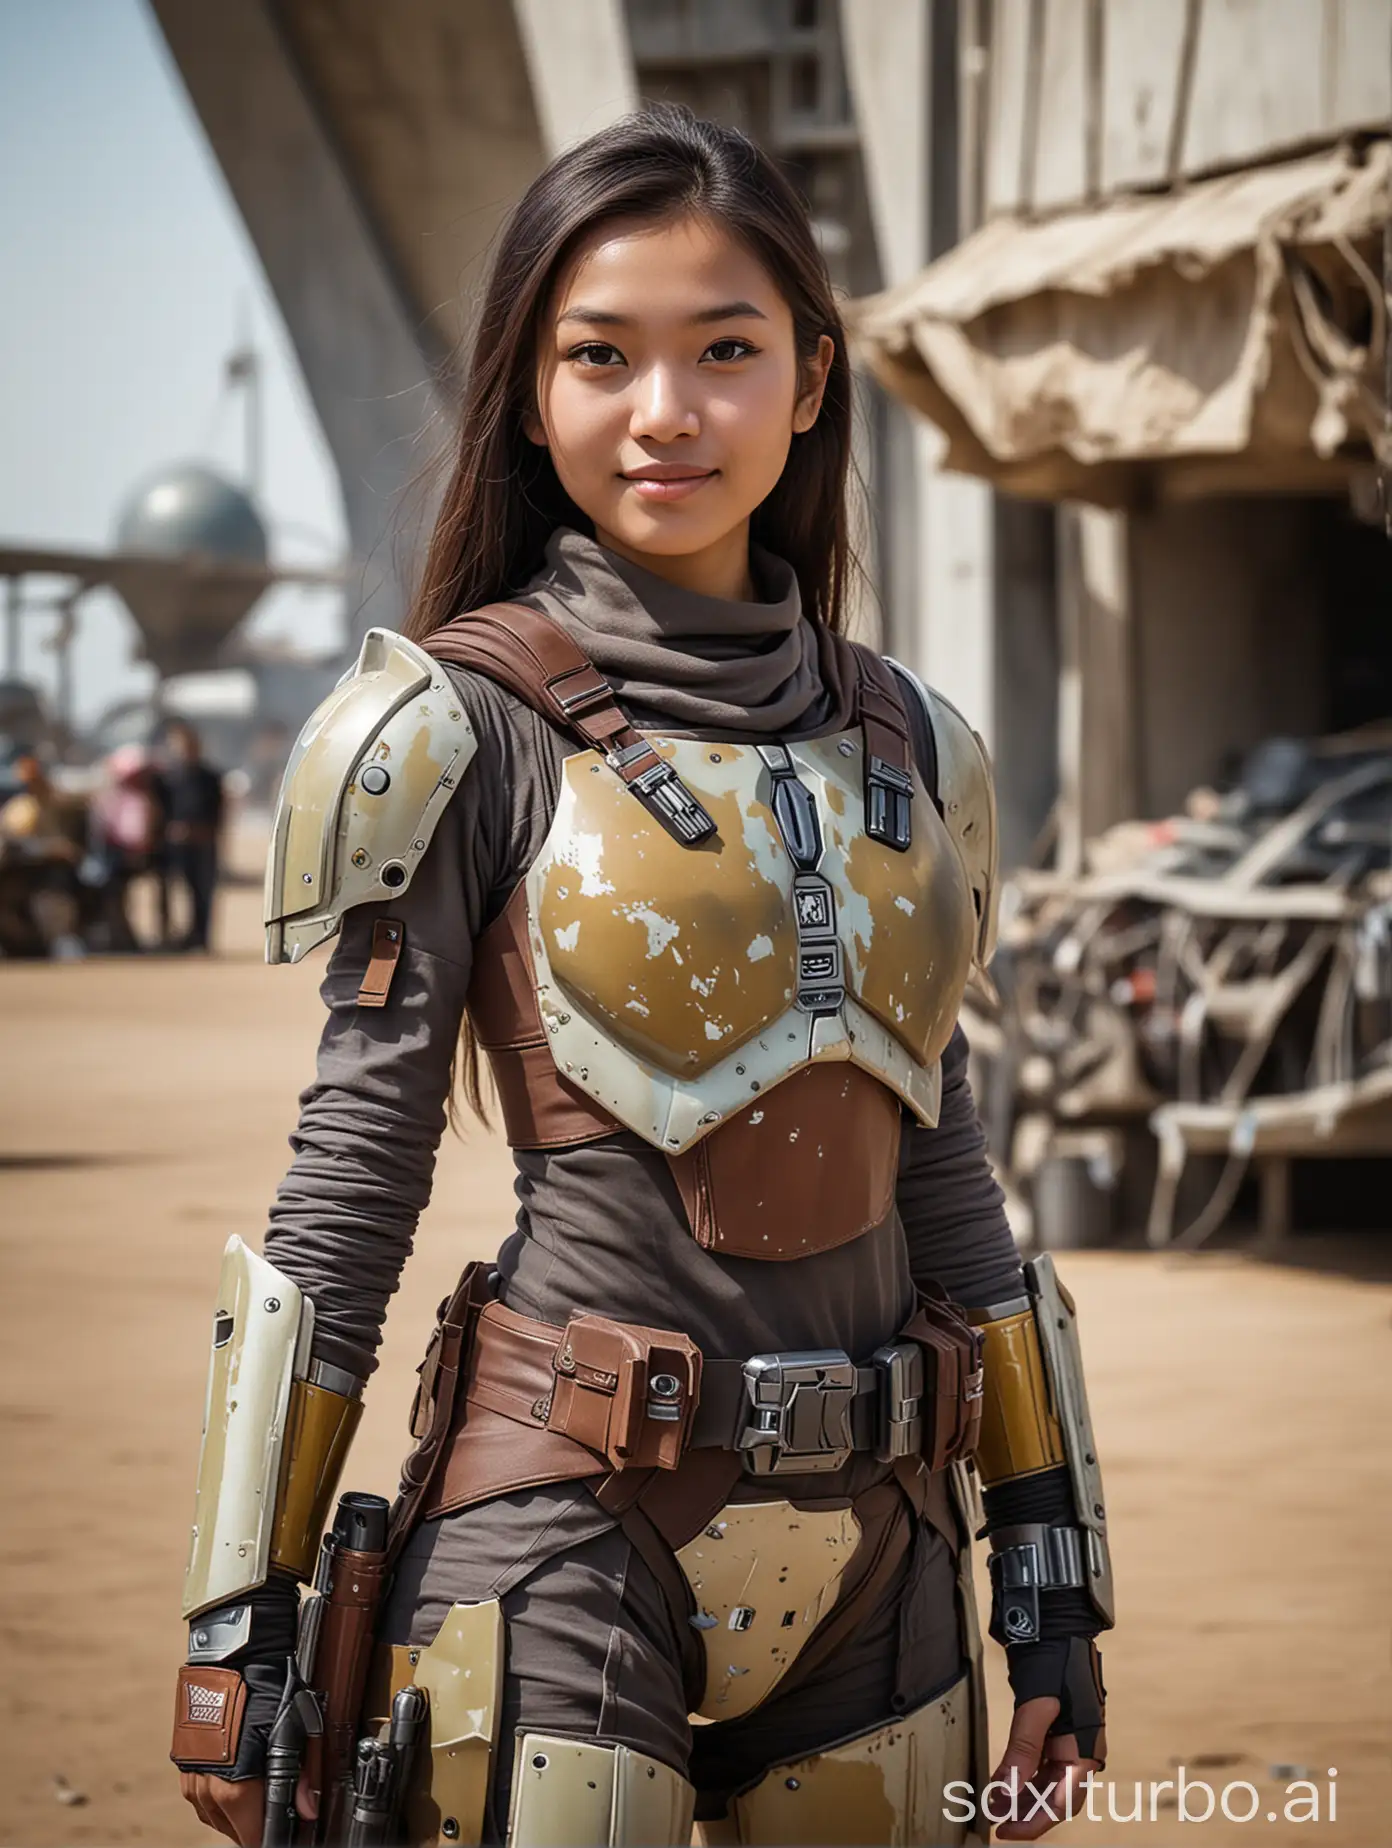 Mandalorian girl, 16-years-old, southeast Asian, at a spaceport